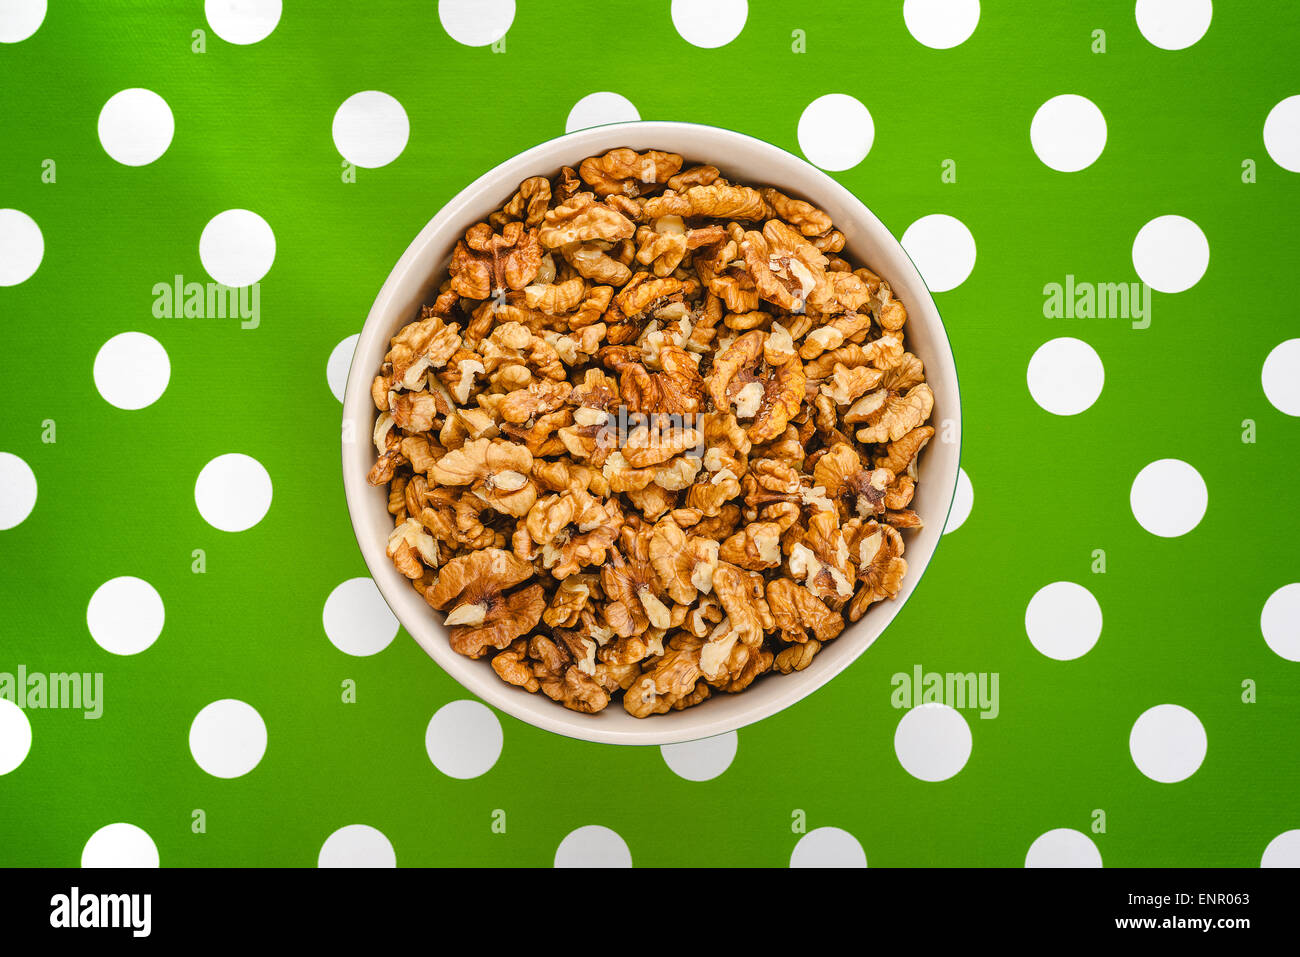 Peeled Walnut Kernels in Ceramic Bowl on Green Polka Dotted Background, Top View Stock Photo